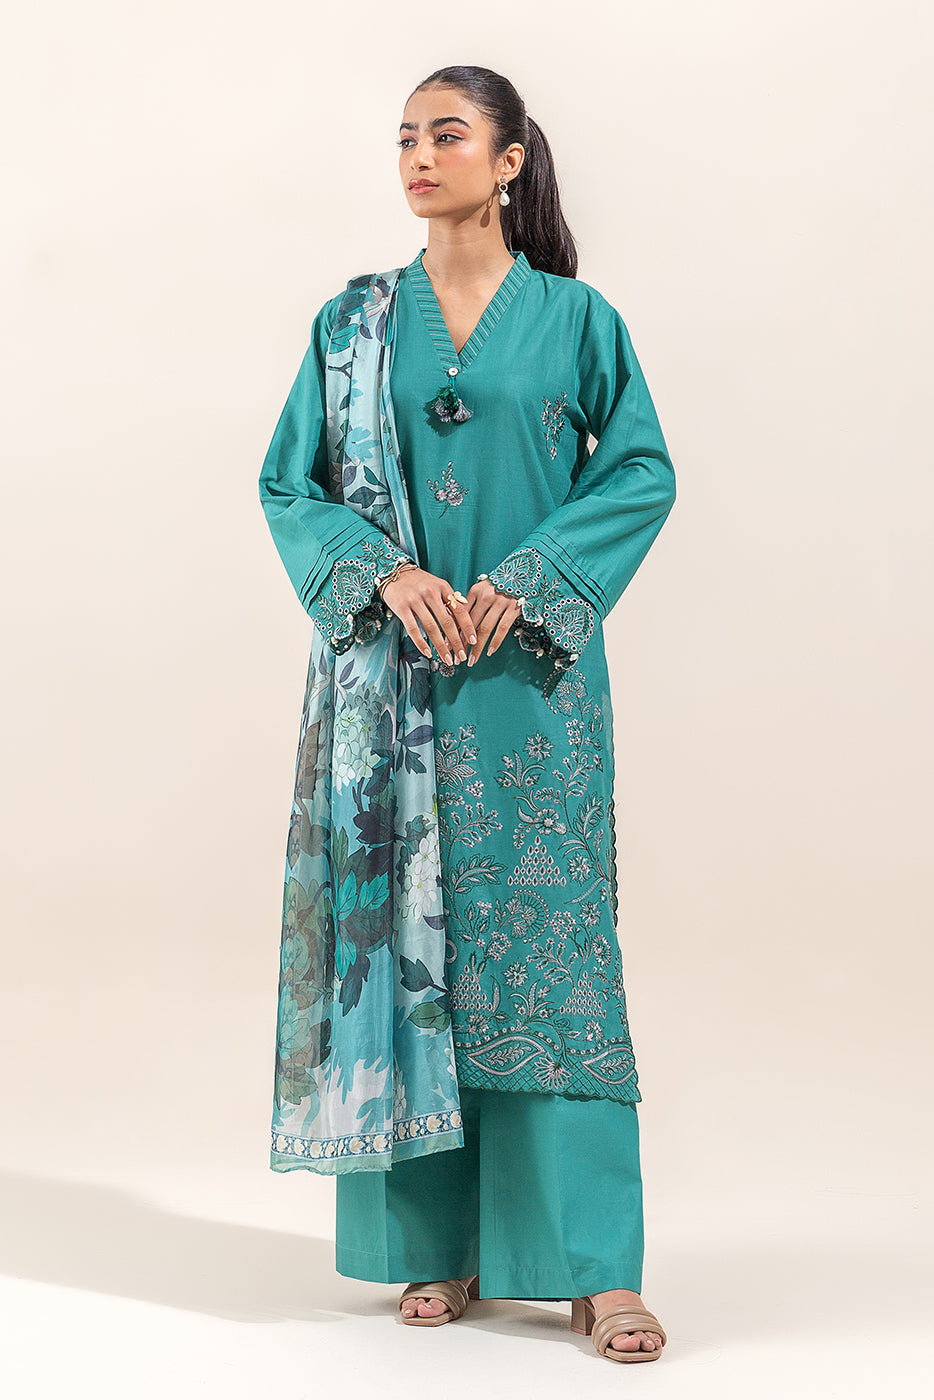 3 PIECE EMBROIDERED LAWN SUIT-CARIBBEAN ALLURE (UNSTITCHED) - BEECHTREE